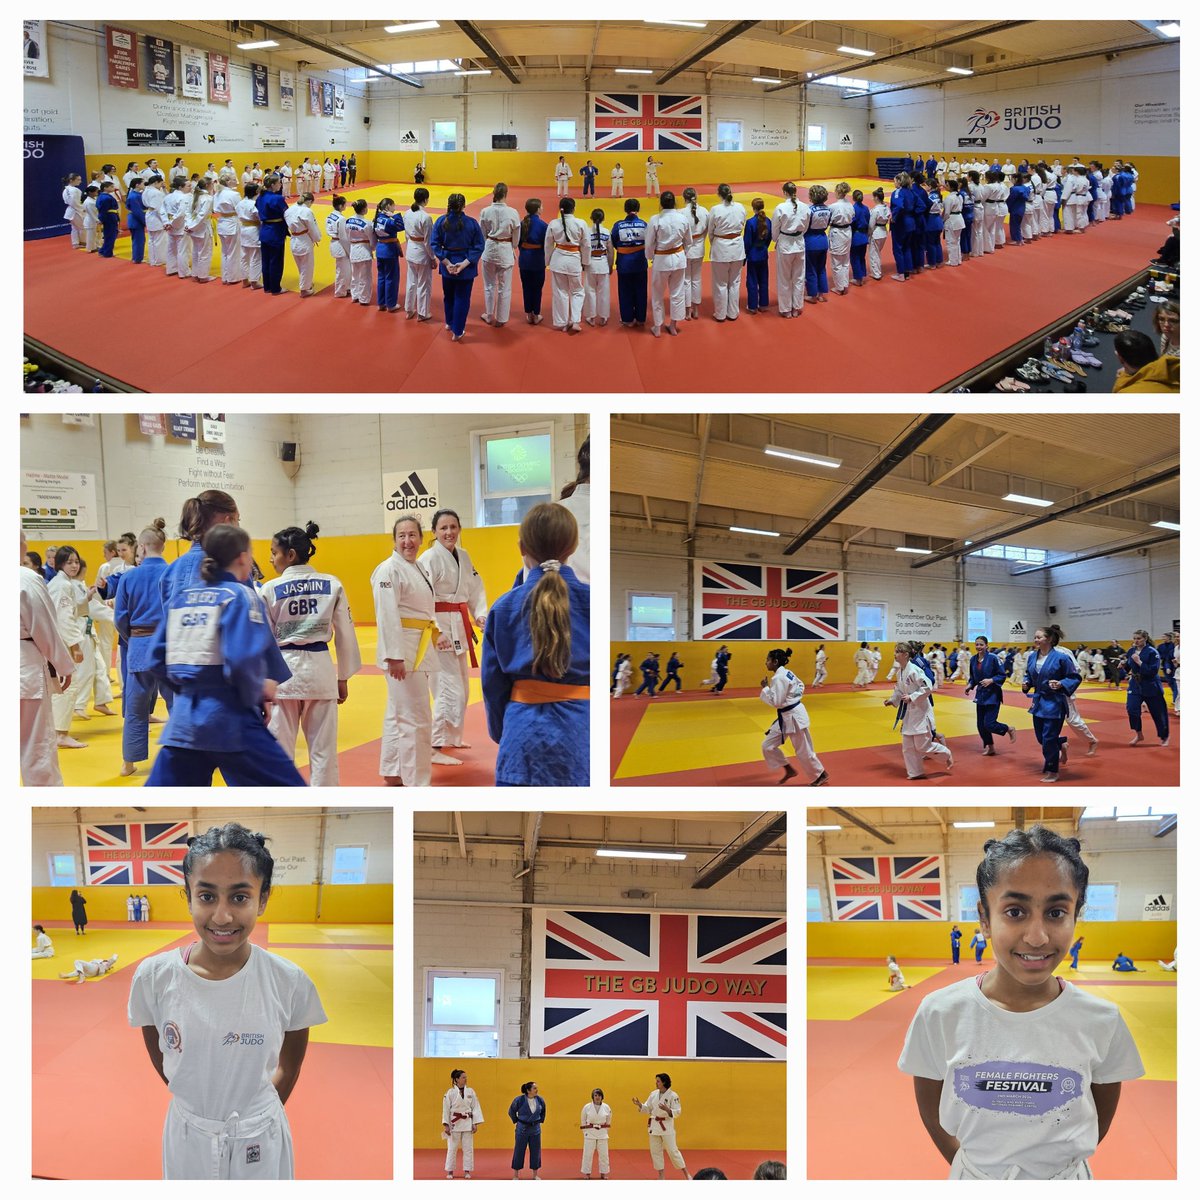 The Fighting Female Festival is underway and the girls have a packed day ahead of them! This is our 3rd time attending since @BritishJudo started this amazing event. Glad to swap the original (and well used) t-shirt for a new one👕🥋🇬🇧🏴󠁧󠁢󠁷󠁬󠁳󠁿 @SamuraiJudoWAL #FFF #ThisGirlCan